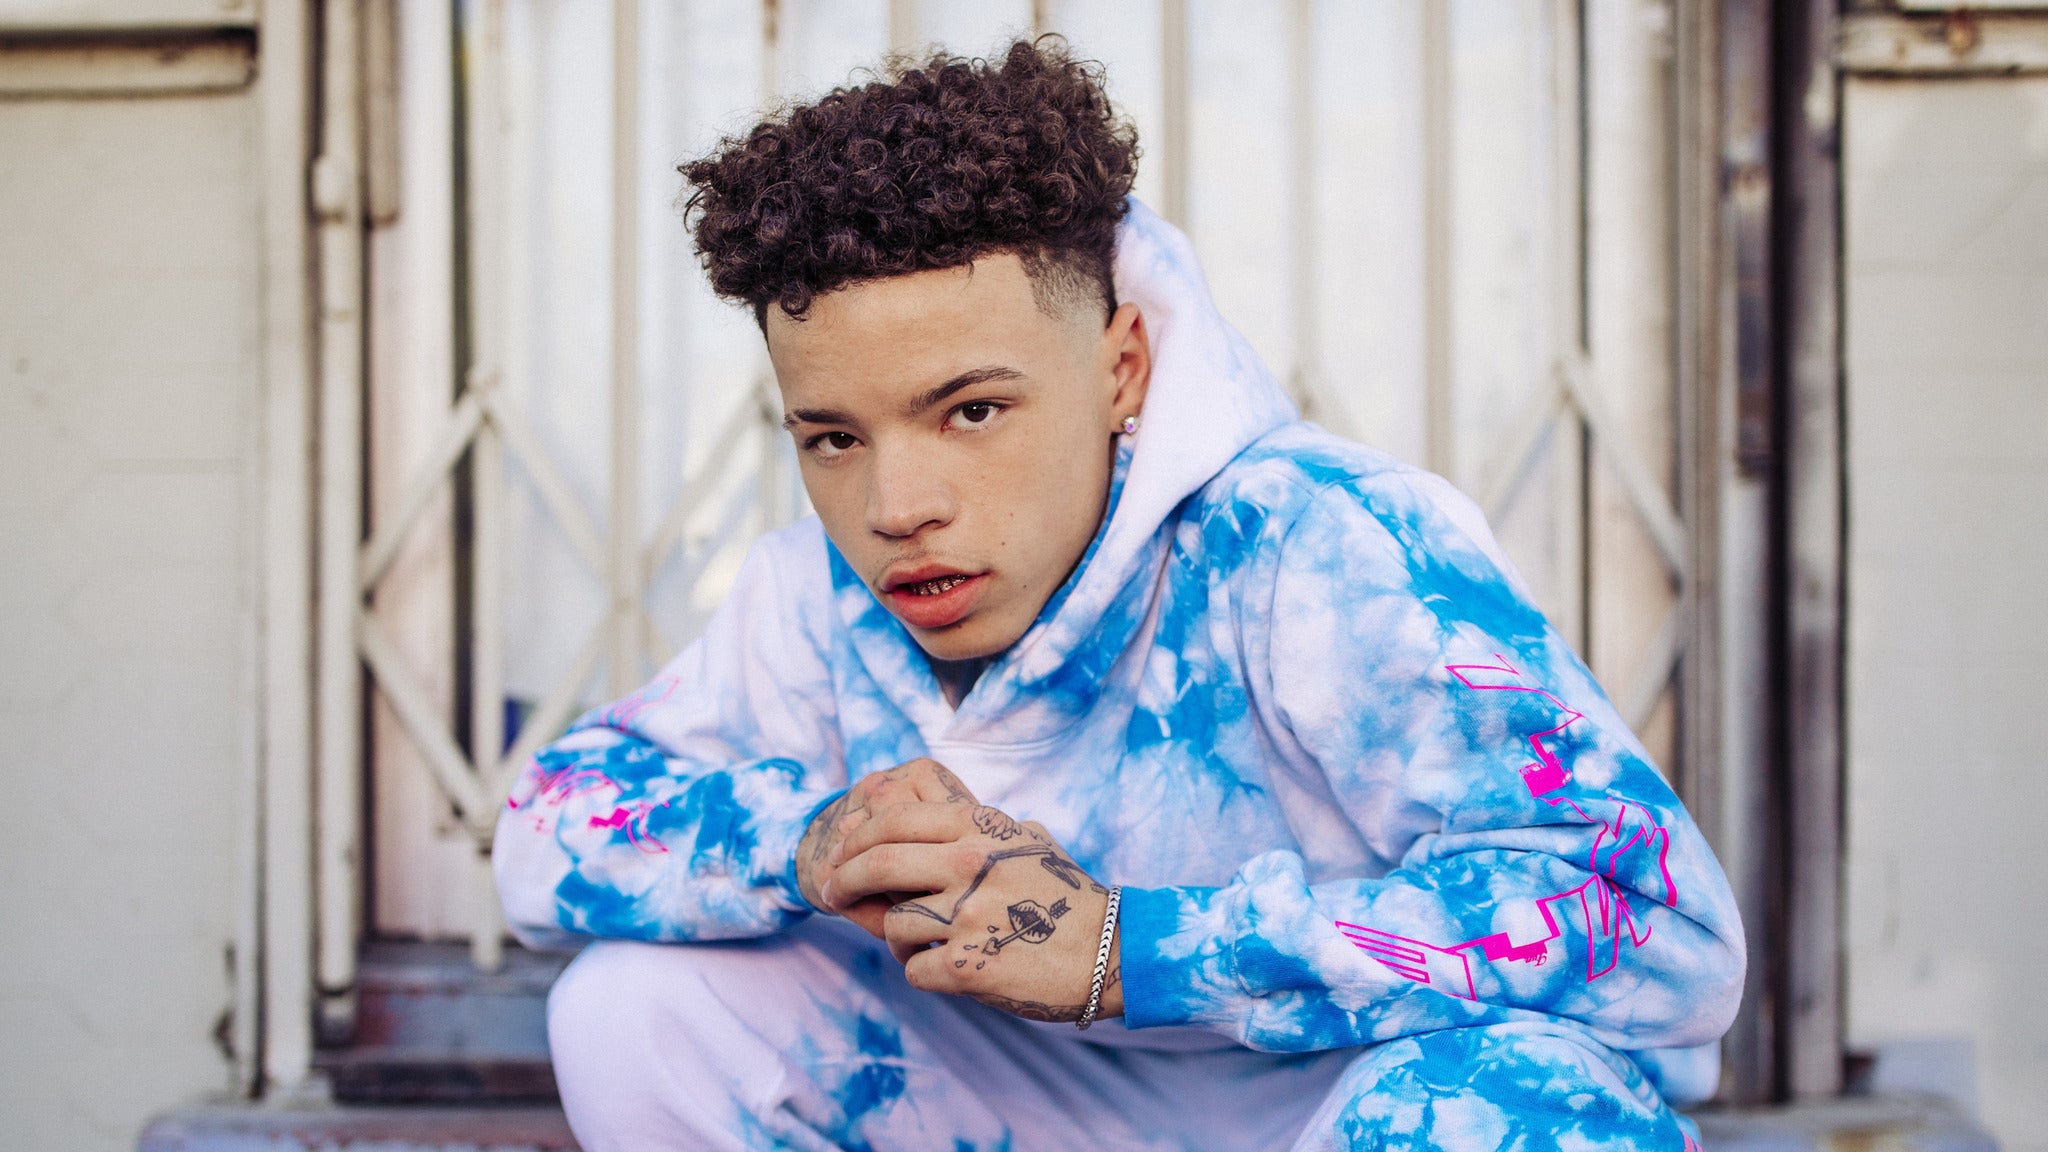 Lil Mosey - Certified Hitmaker North American Tour 2020 in San Diego promo photo for Artist presale offer code